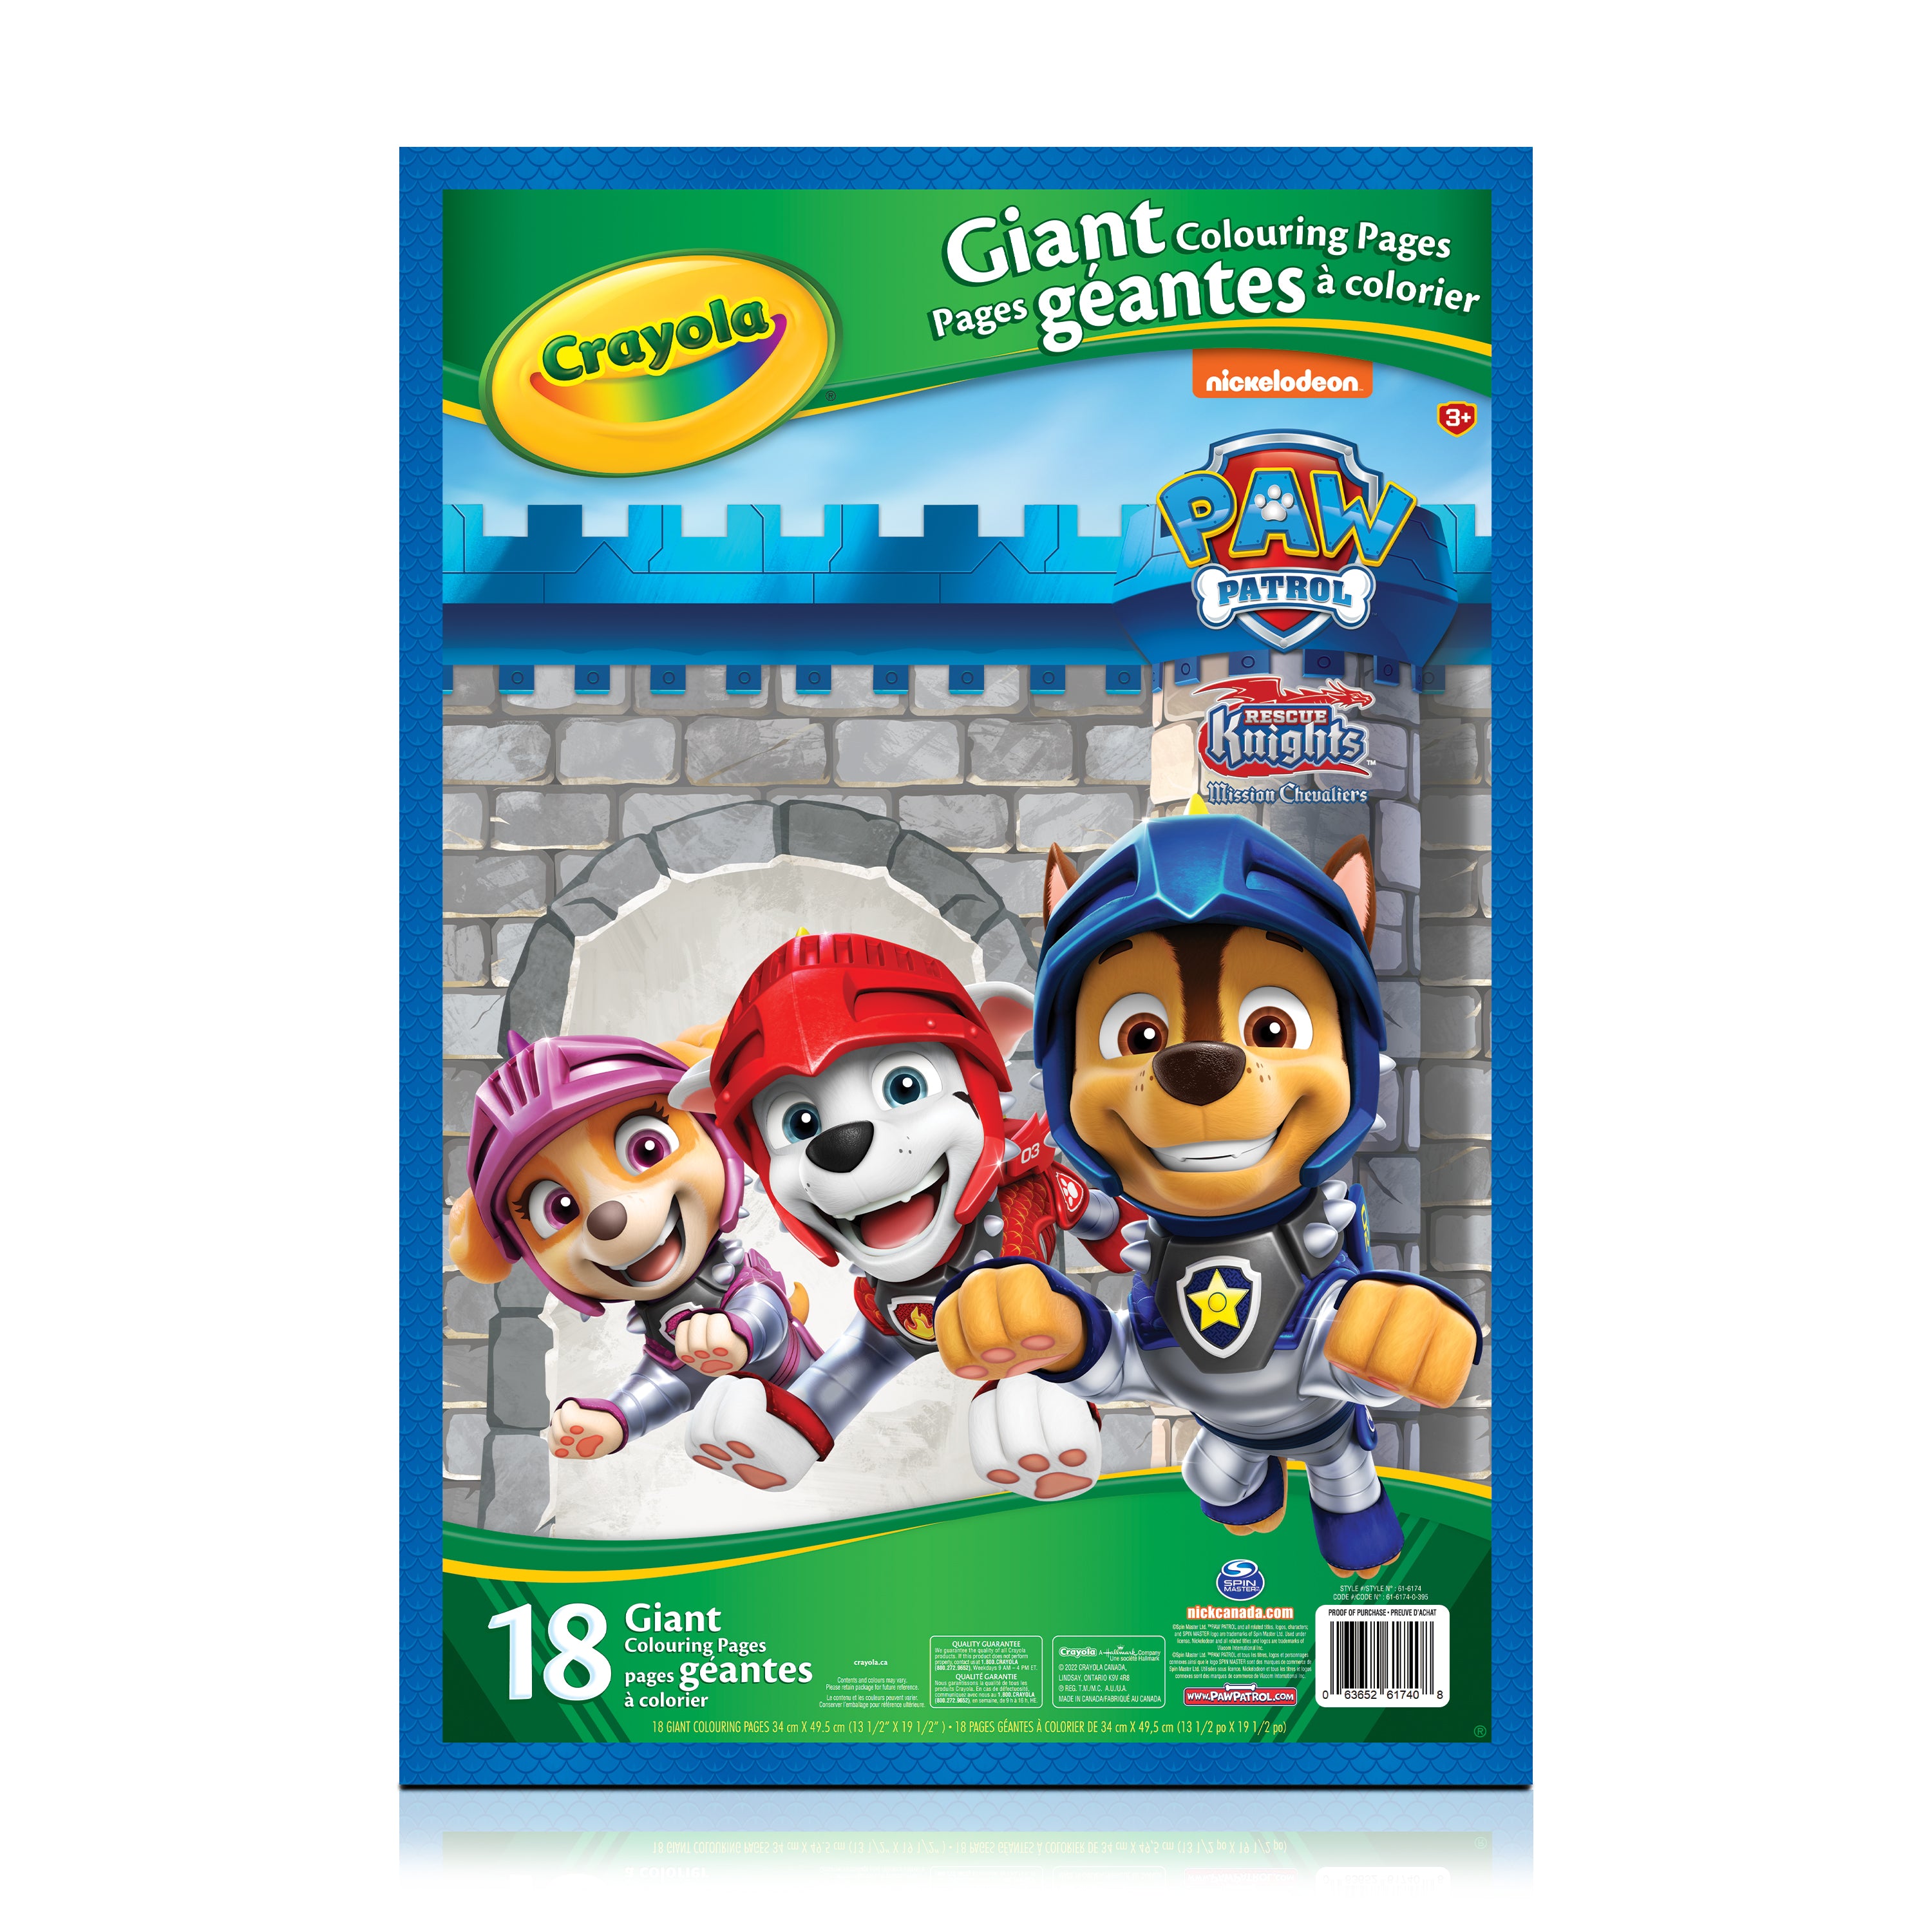 Crayola Giant Colouring Pages, Paw Patrol